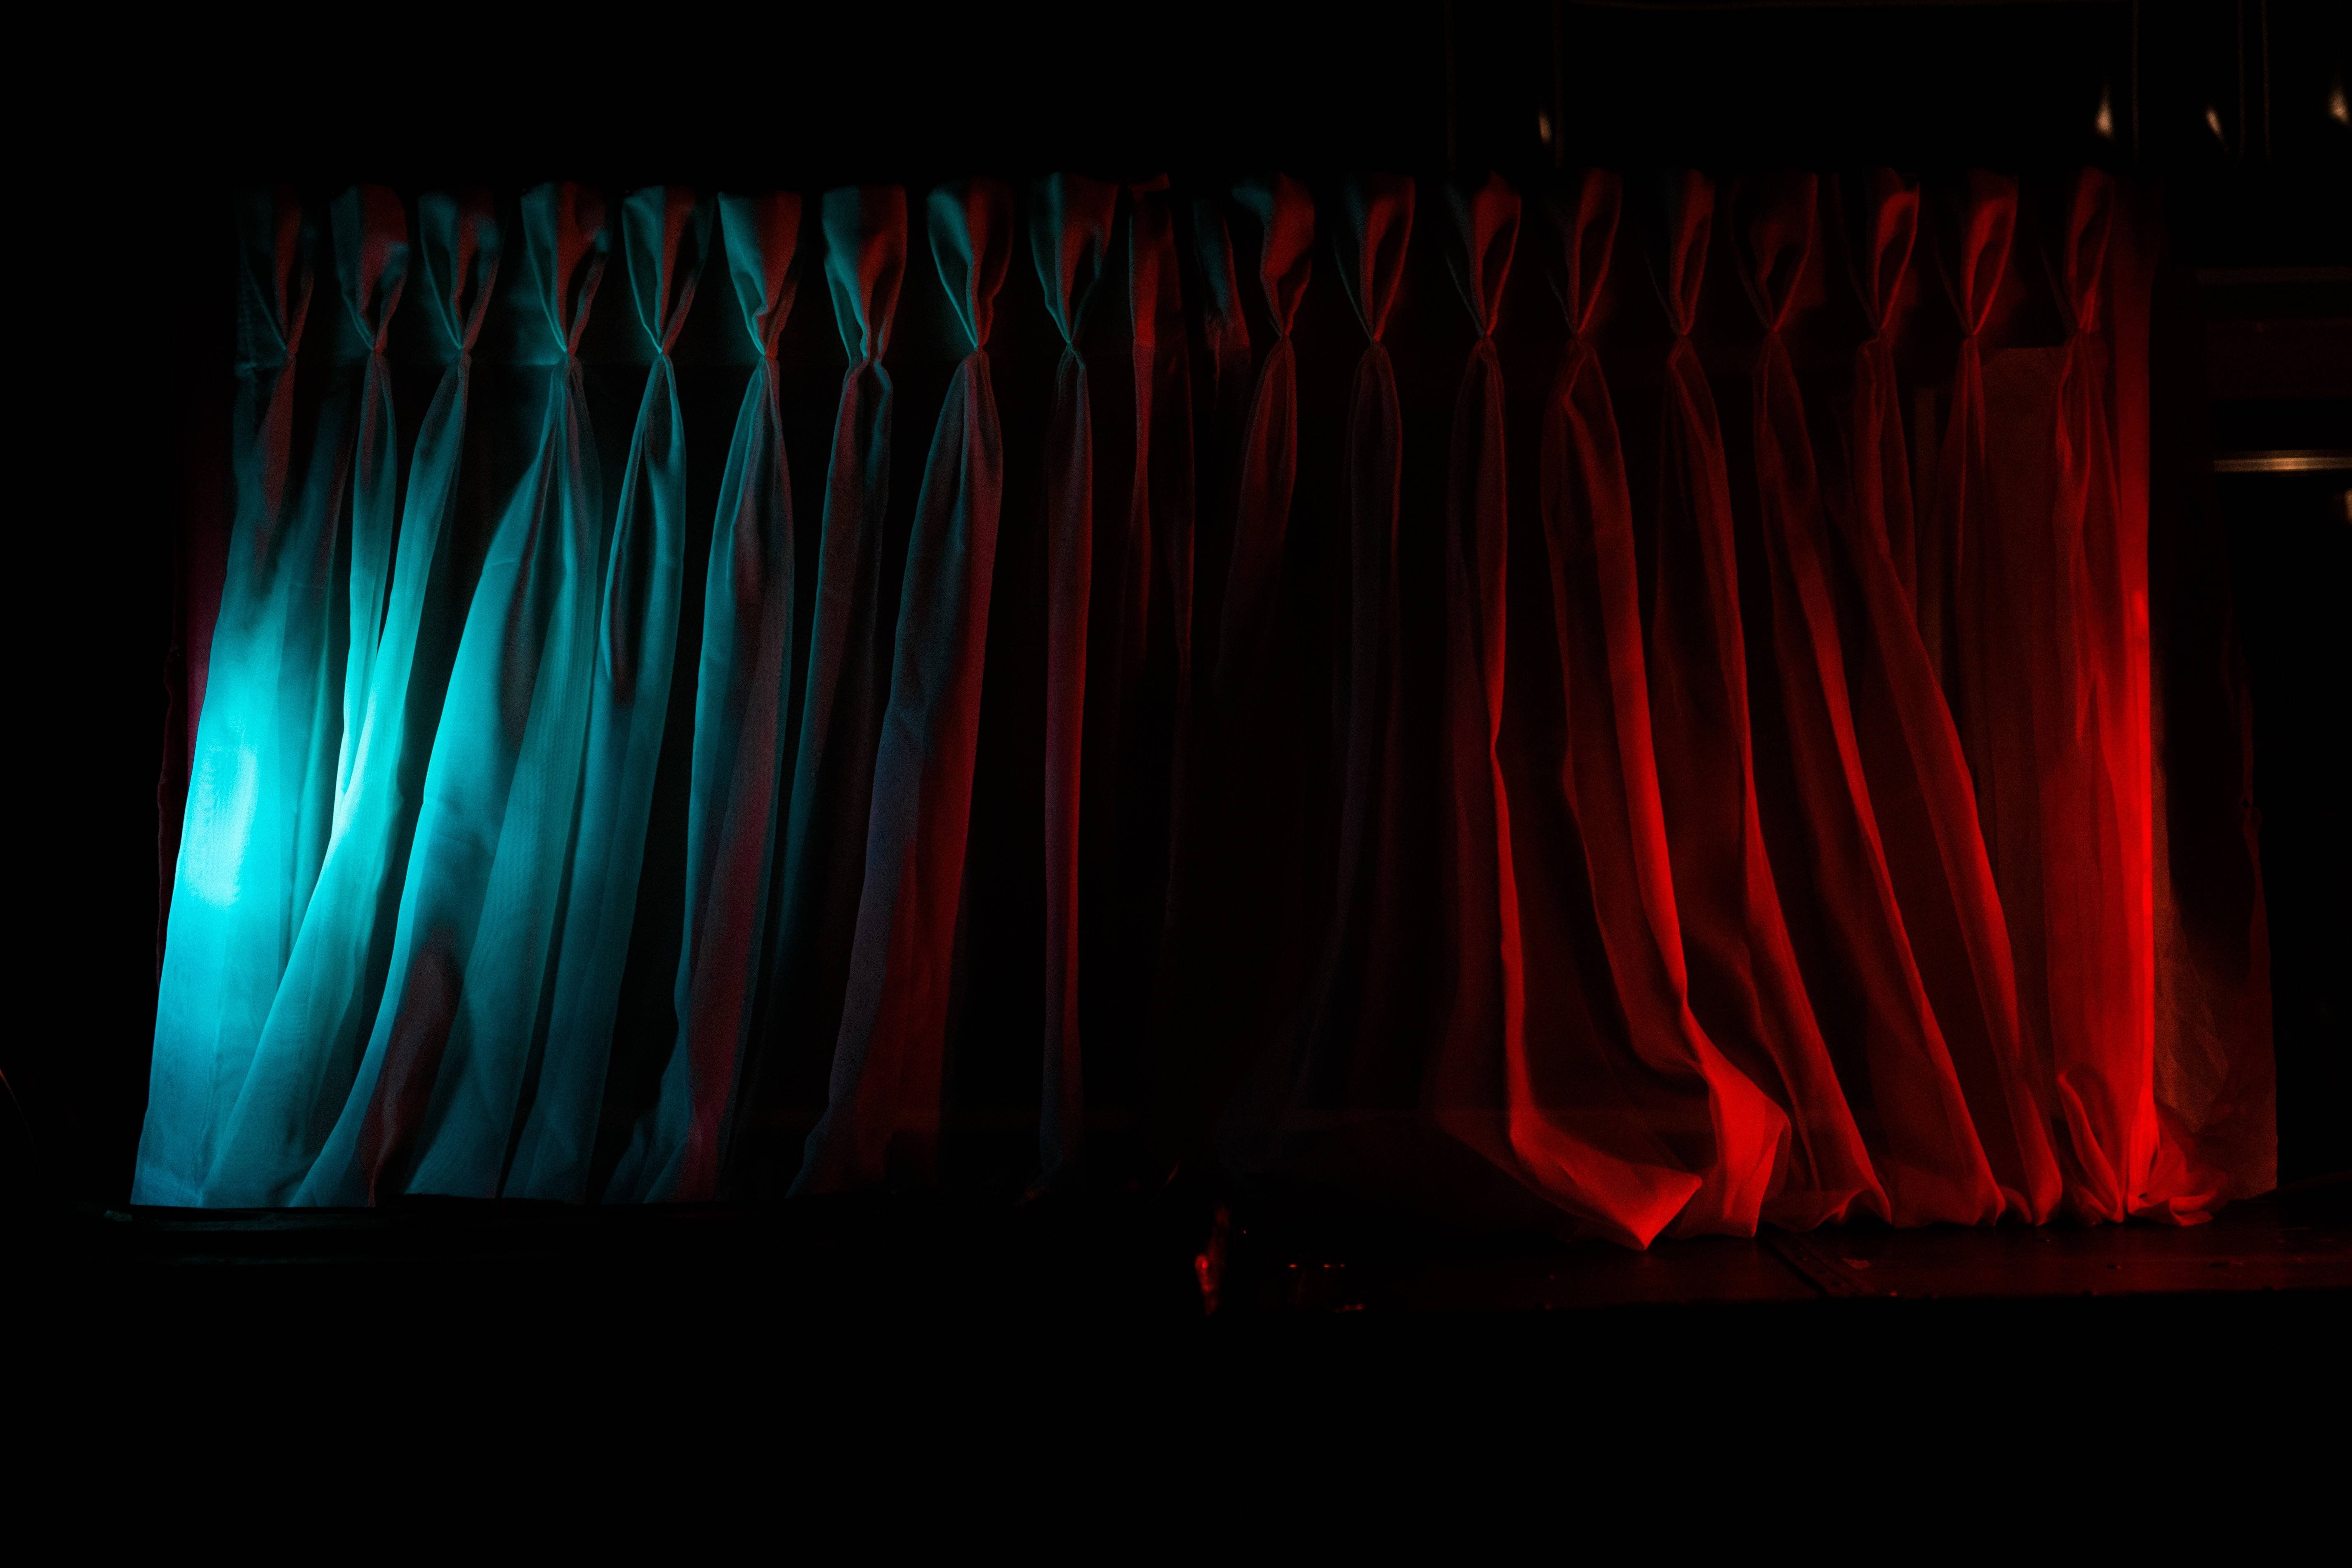 Curtains 4K wallpaper for your desktop or mobile screen free and easy to download